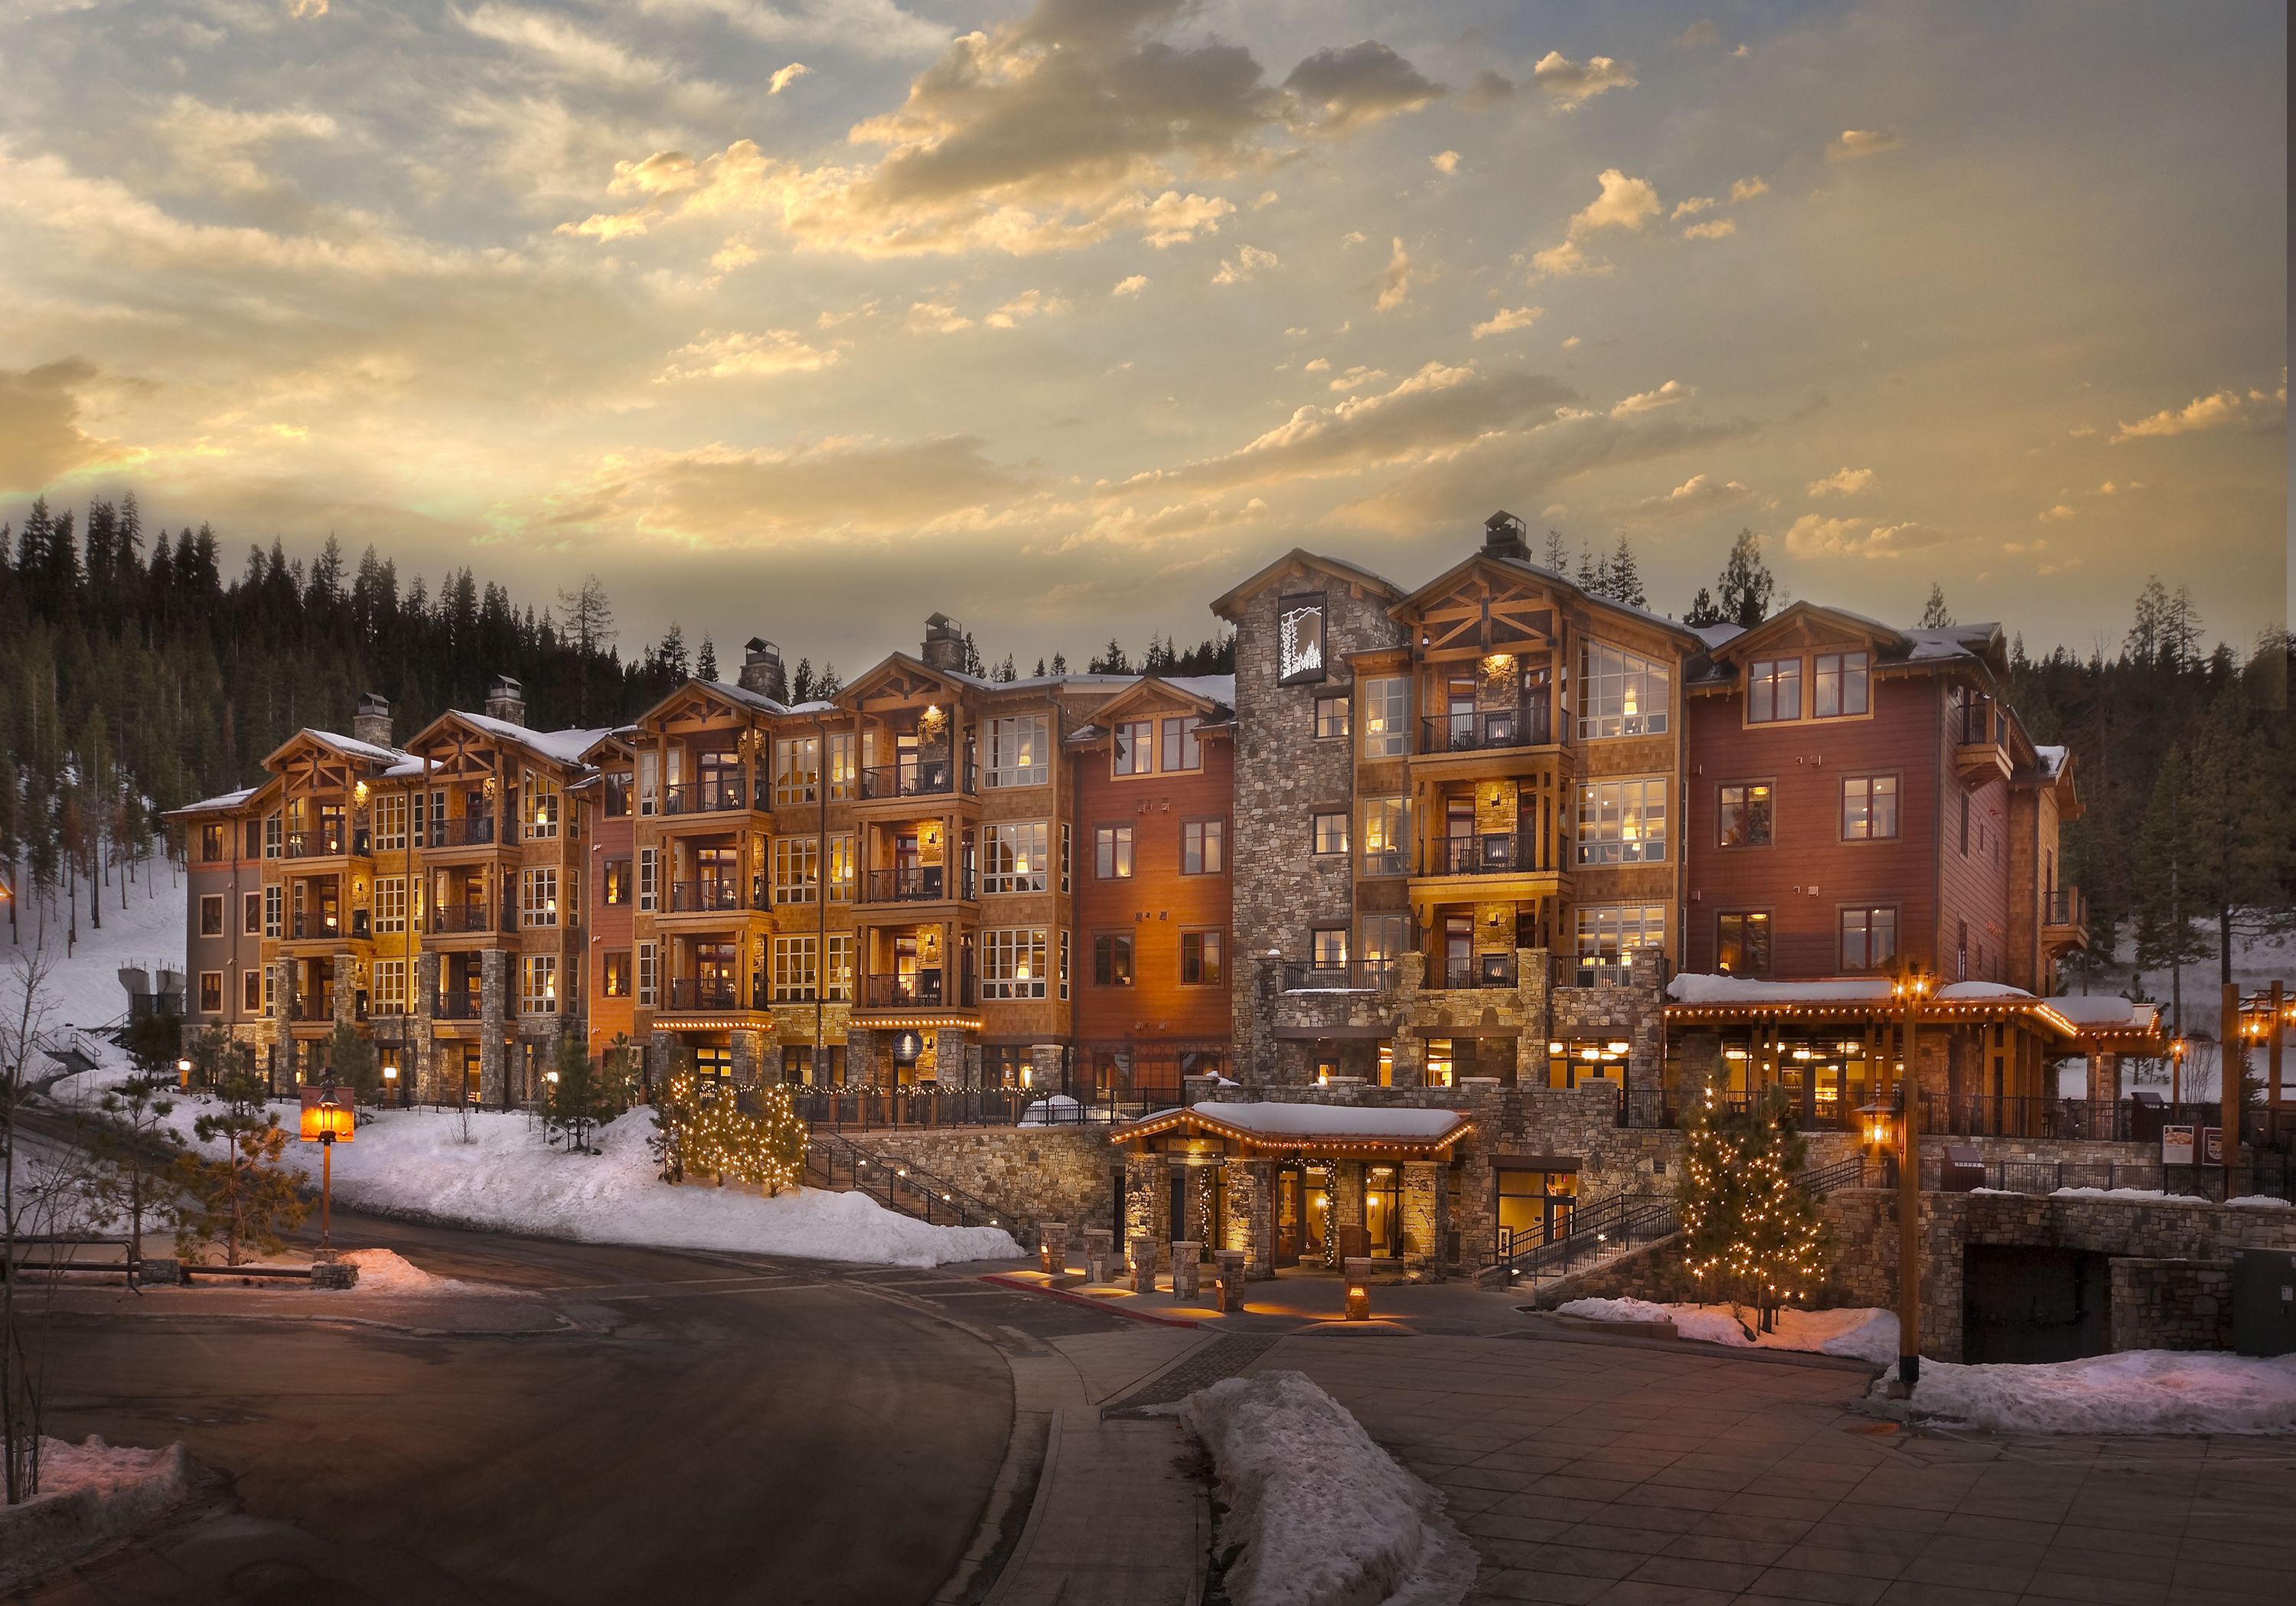 Northstar Lodge By Welk Resorts In Lake Tahoe Announces Expansion With New Building And Sales Center Opening Welk Resort Lake Tahoe Hotels Ski Resort Vacation